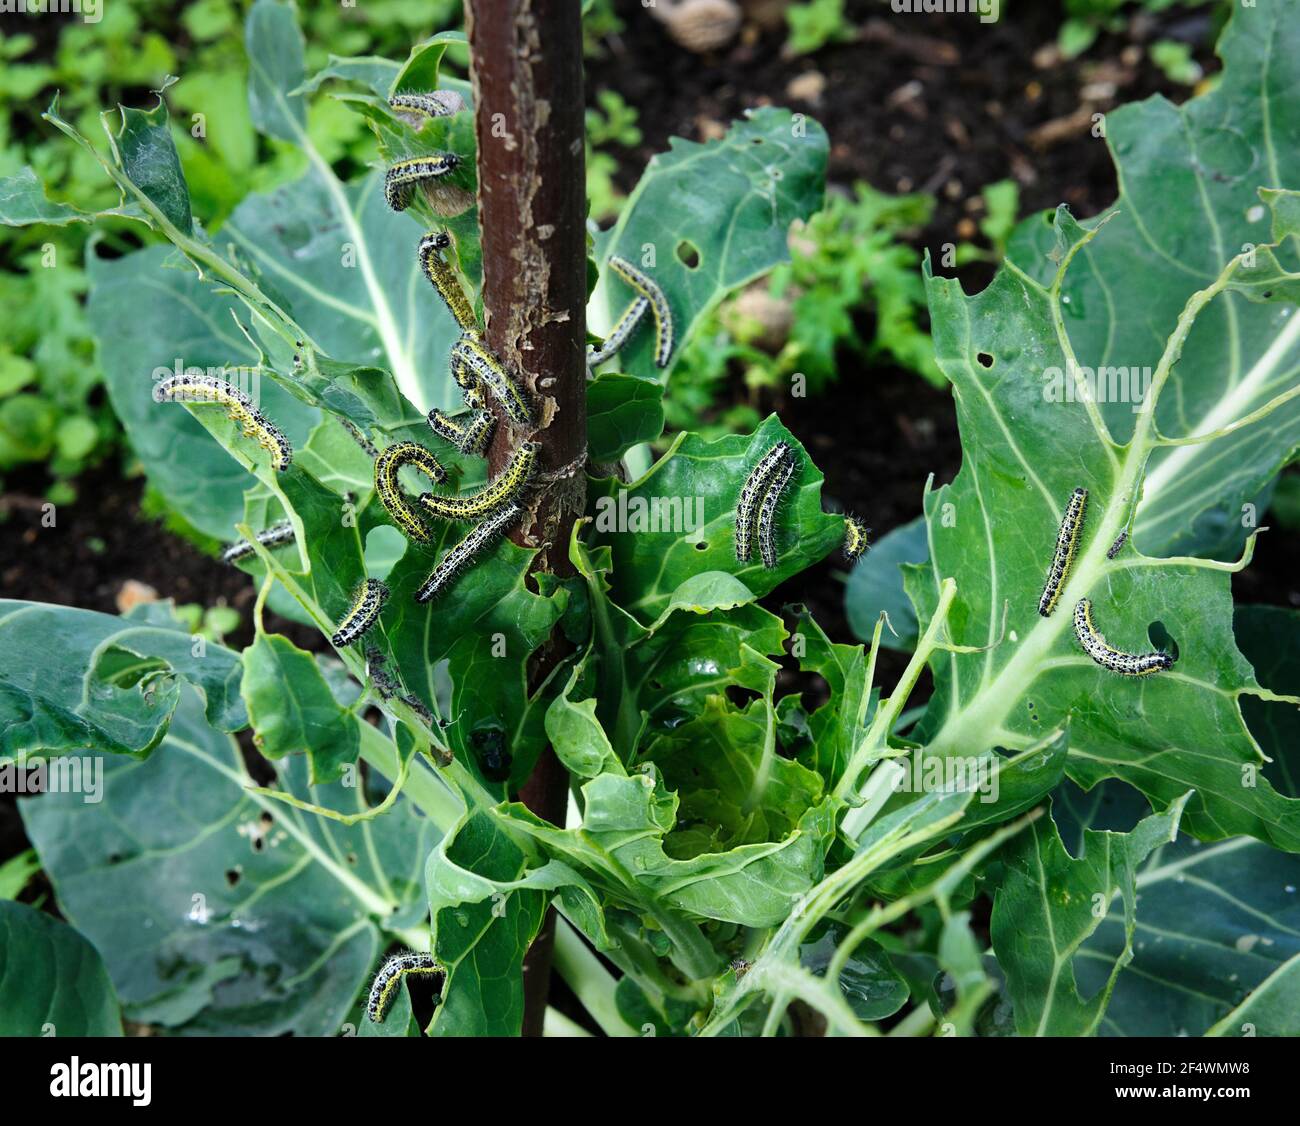 Large Cabbage White butterfly caterpillars eating leaves and heart of brassica plant. Stock Photo